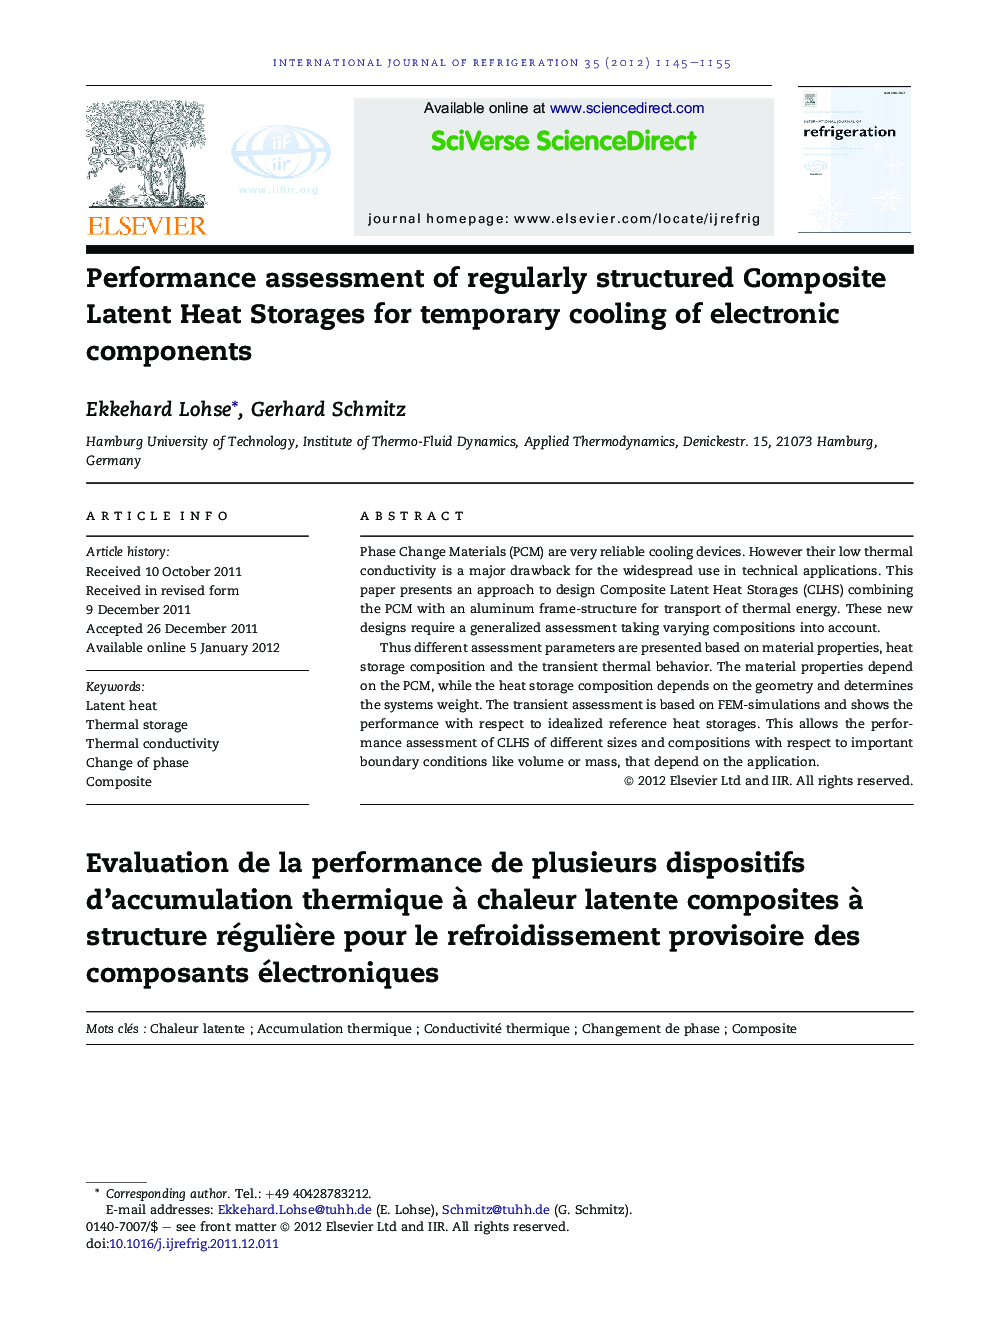 Performance assessment of regularly structured Composite Latent Heat Storages for temporary cooling of electronic components